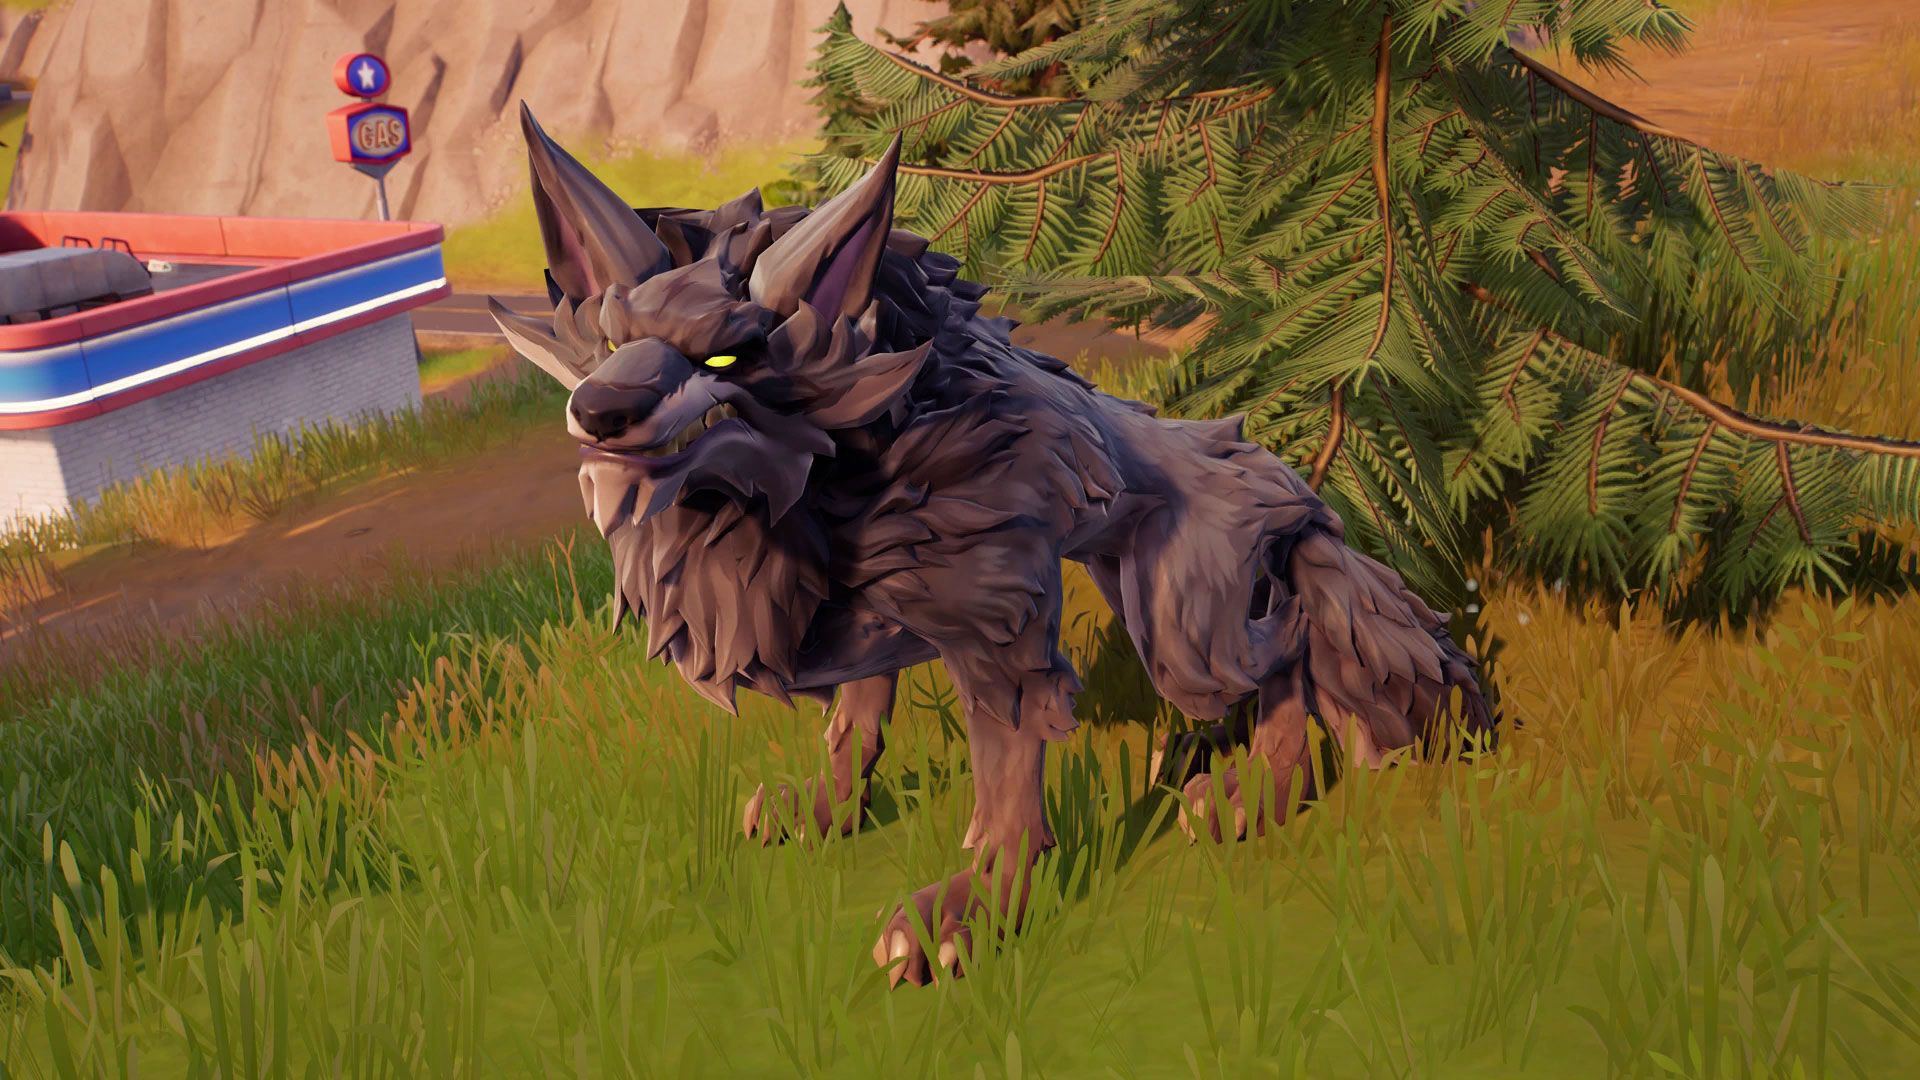 How to perform an aerial 360 spin in Fortnite? Perform an aerial 360 spin while dismounting a Wolf or Boar